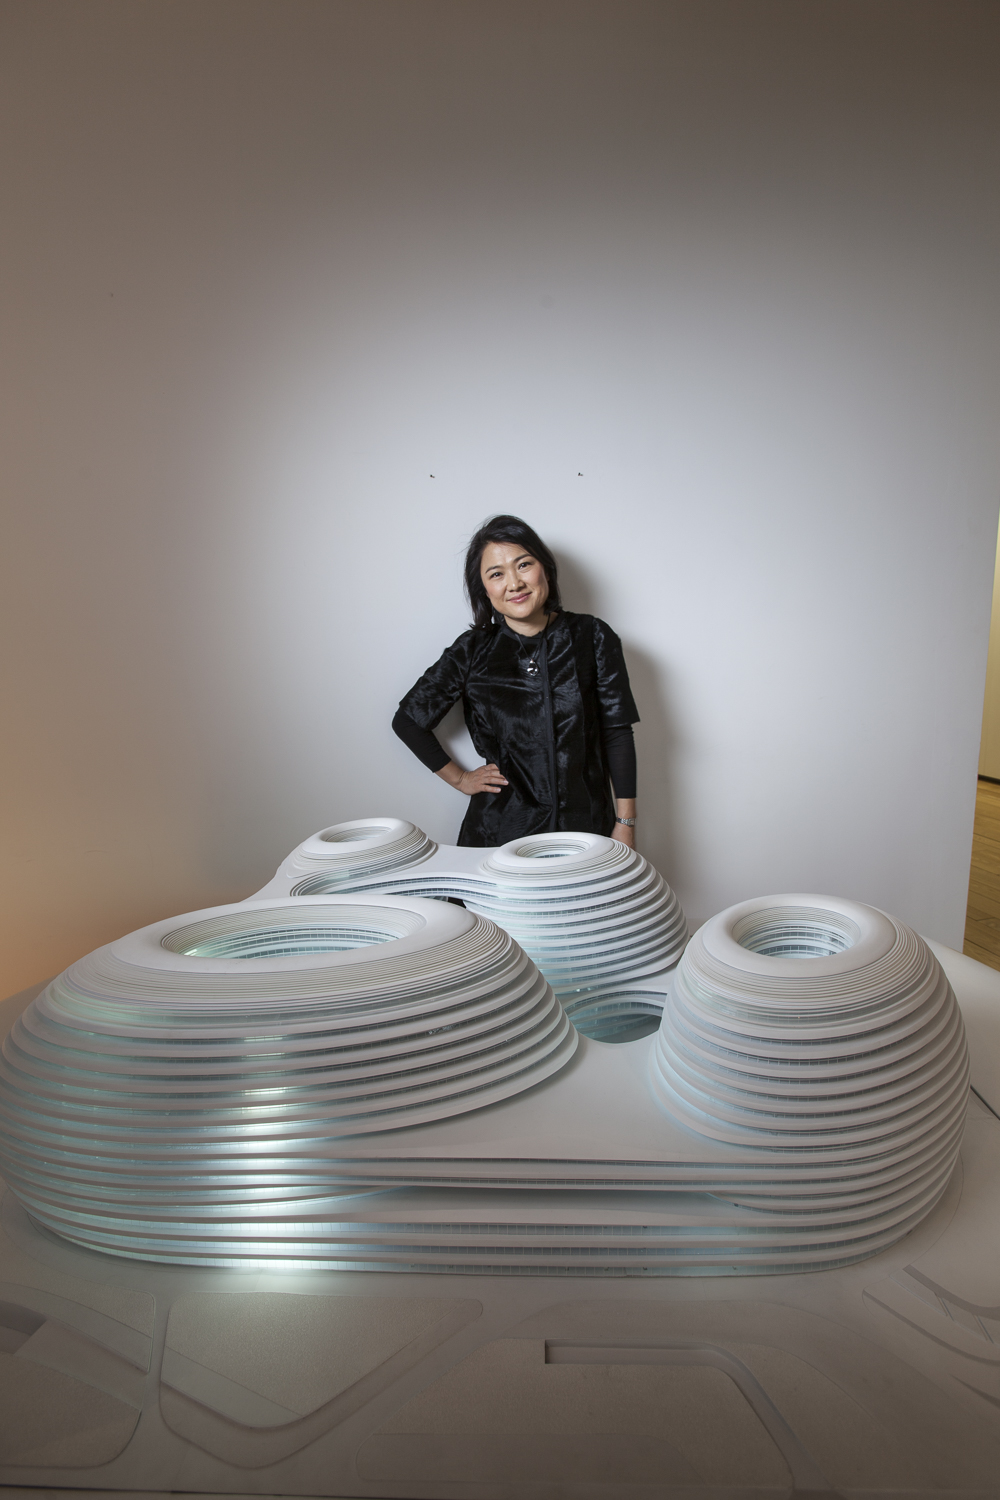 Zhang Xin, founder of Soho China,one of China's largest real estate developers in Beijing. Forbes Magazine